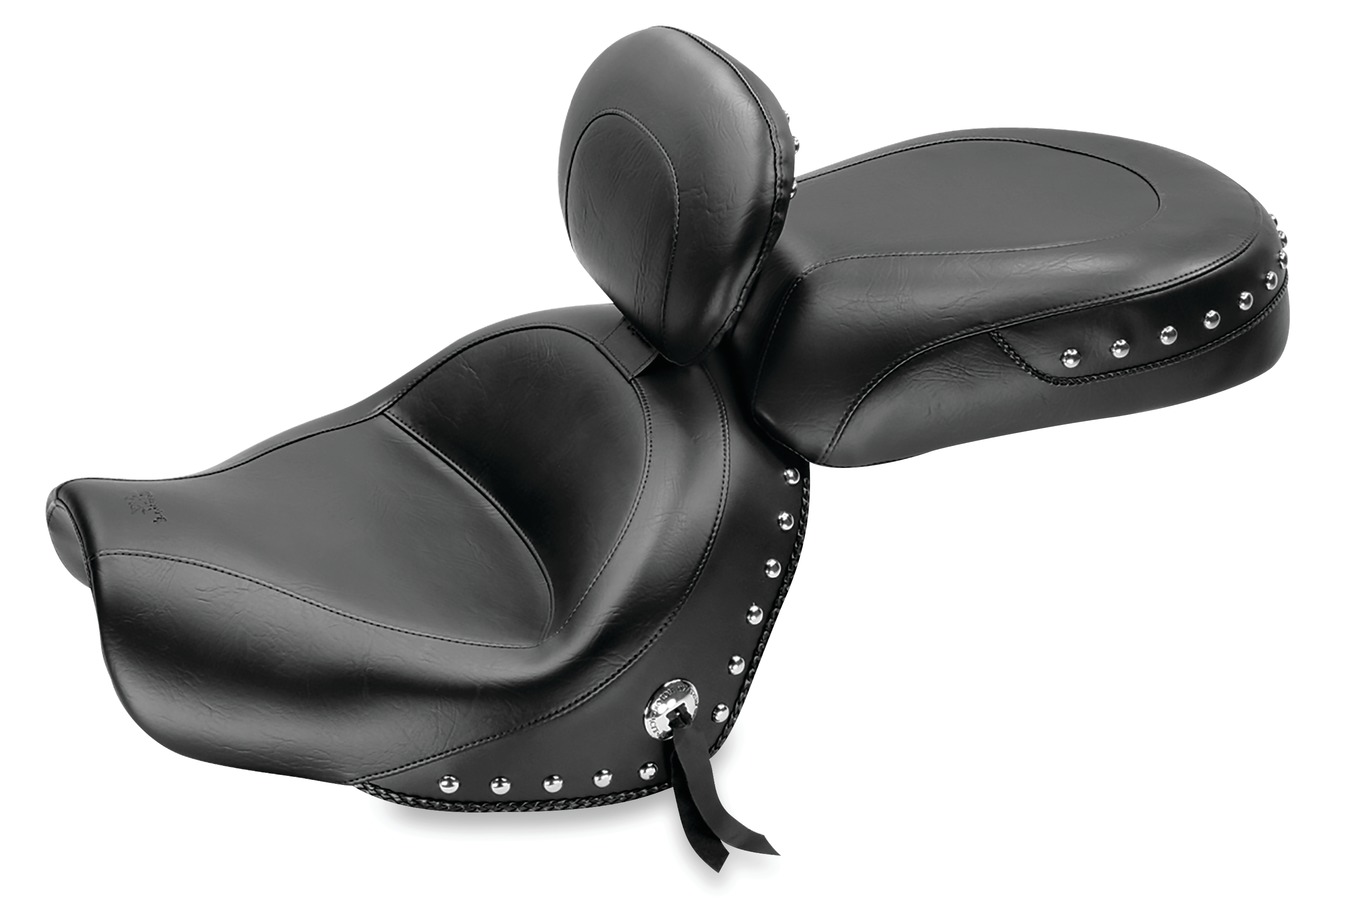 Standard Touring Two-Piece Seat with Driver Backrest for Yamaha V-Star 950 & 950 Tourer 2009-